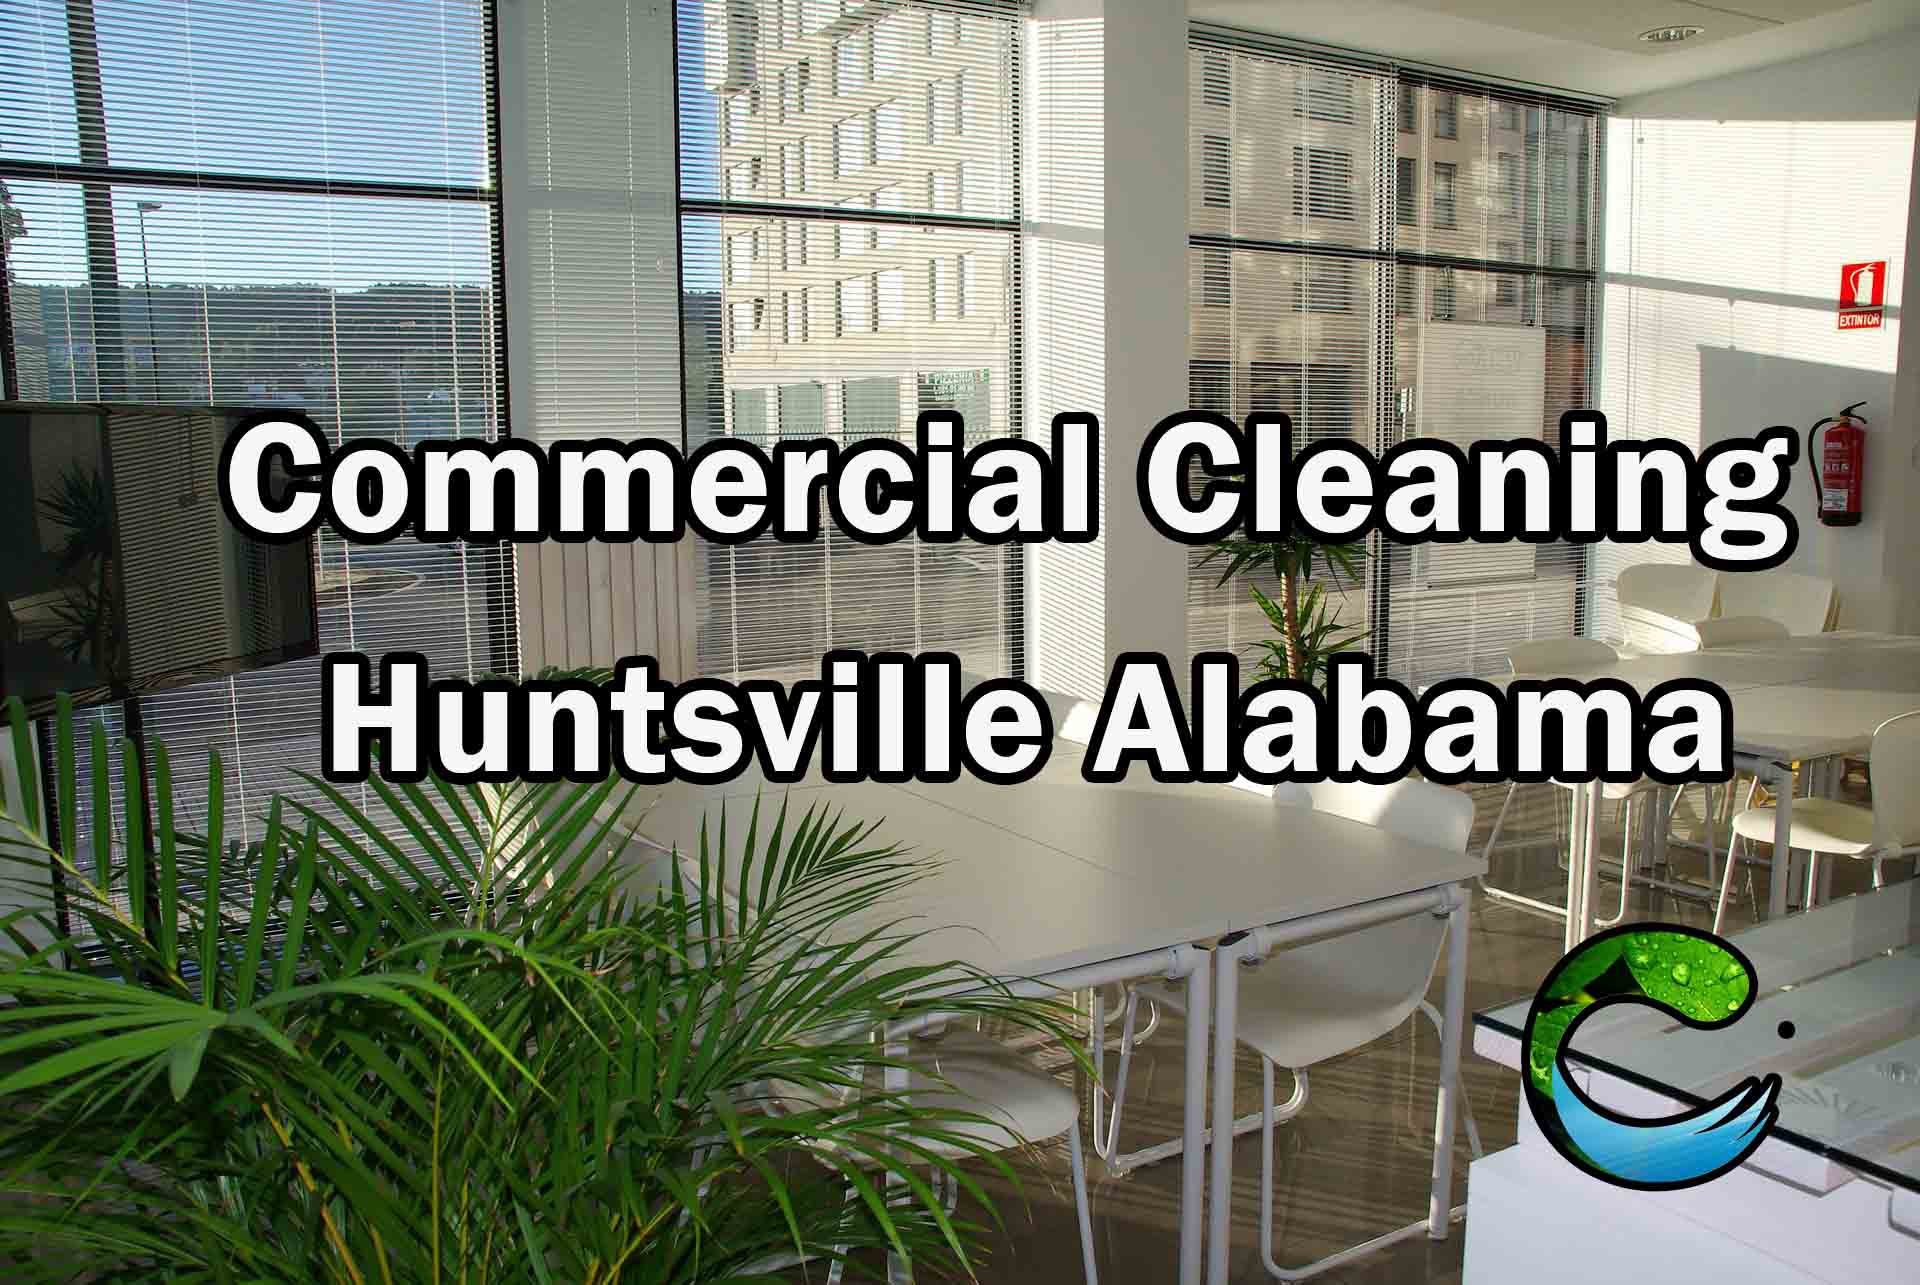 Commercial Cleaning - Huntsville Alabama